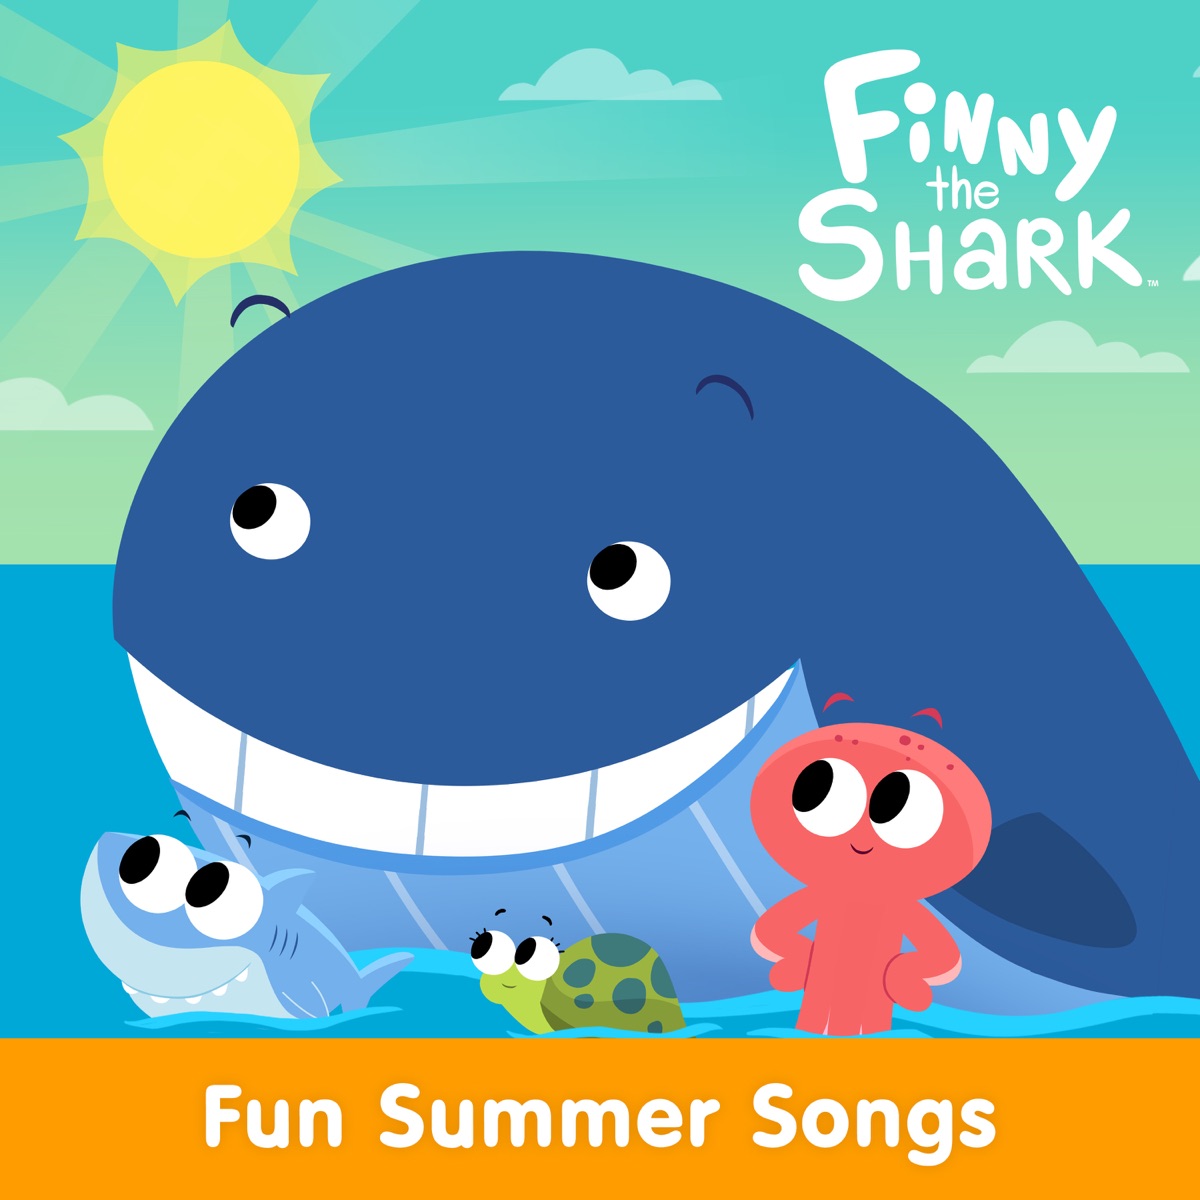 Fun Summer Songs With Finny The Shark - EP - Album by Finny The Shark &  Super Simple Songs - Apple Music